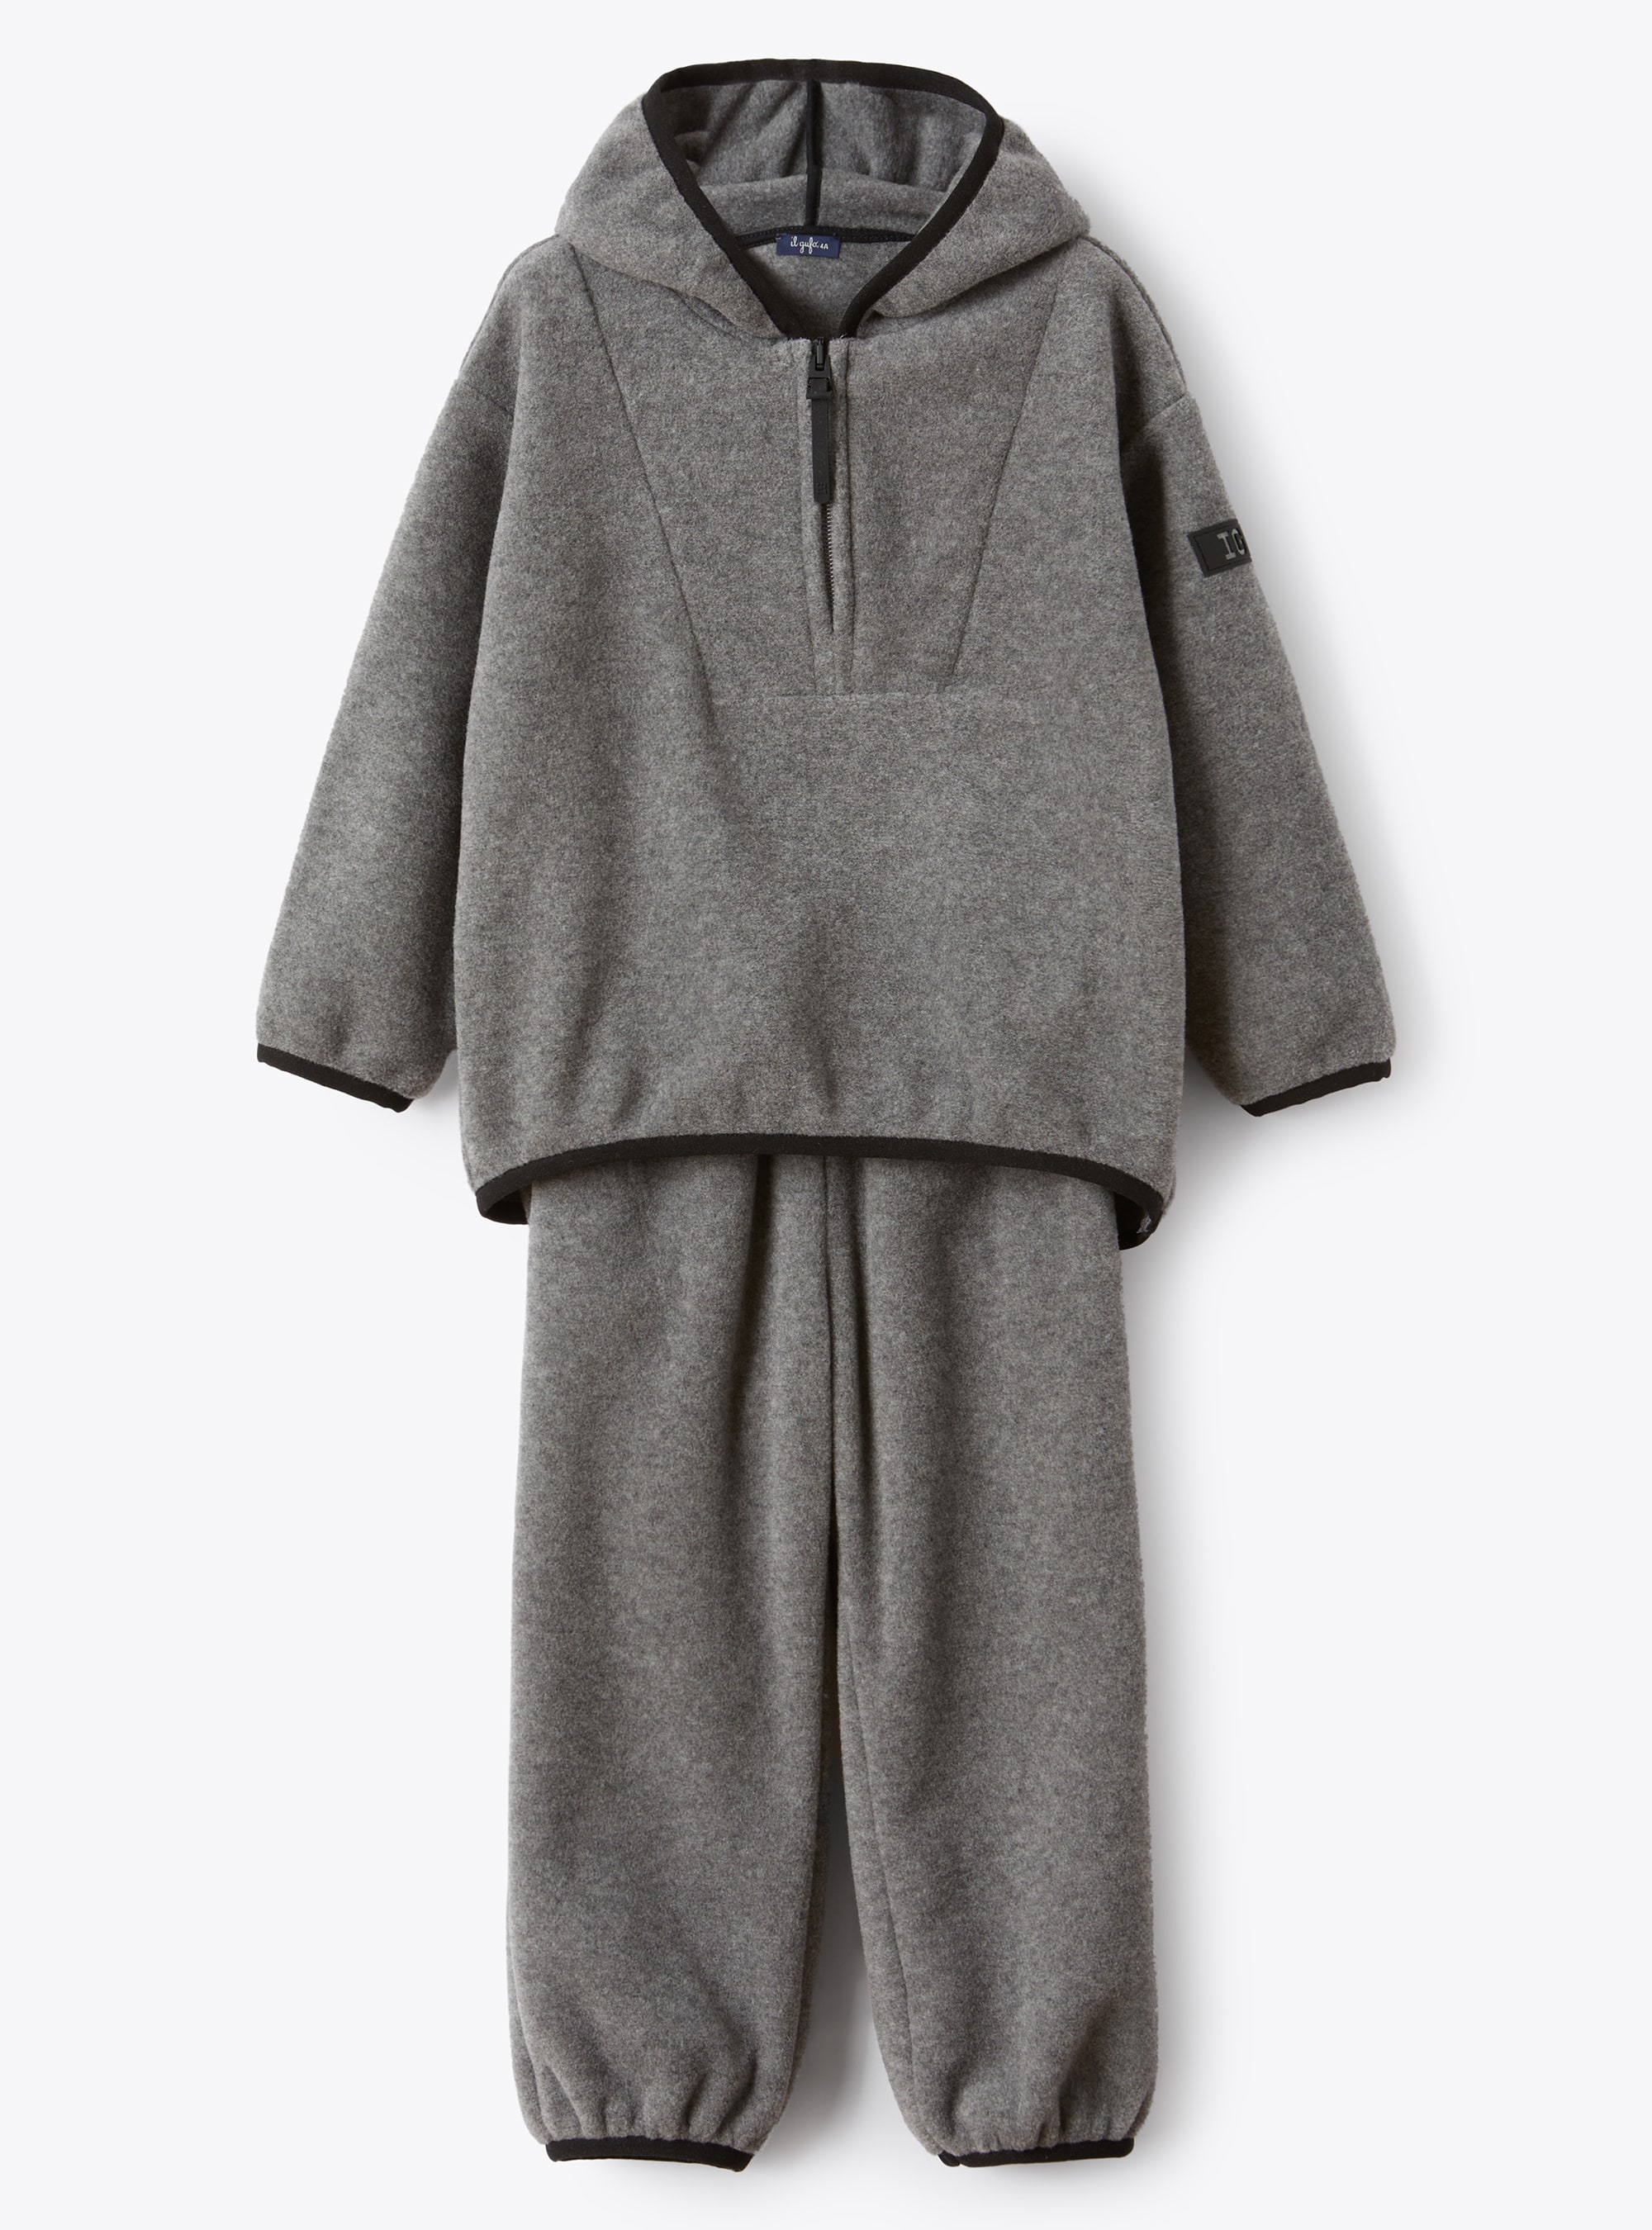 Grey fleece hoodie outfit - Two-piece sets - Il Gufo